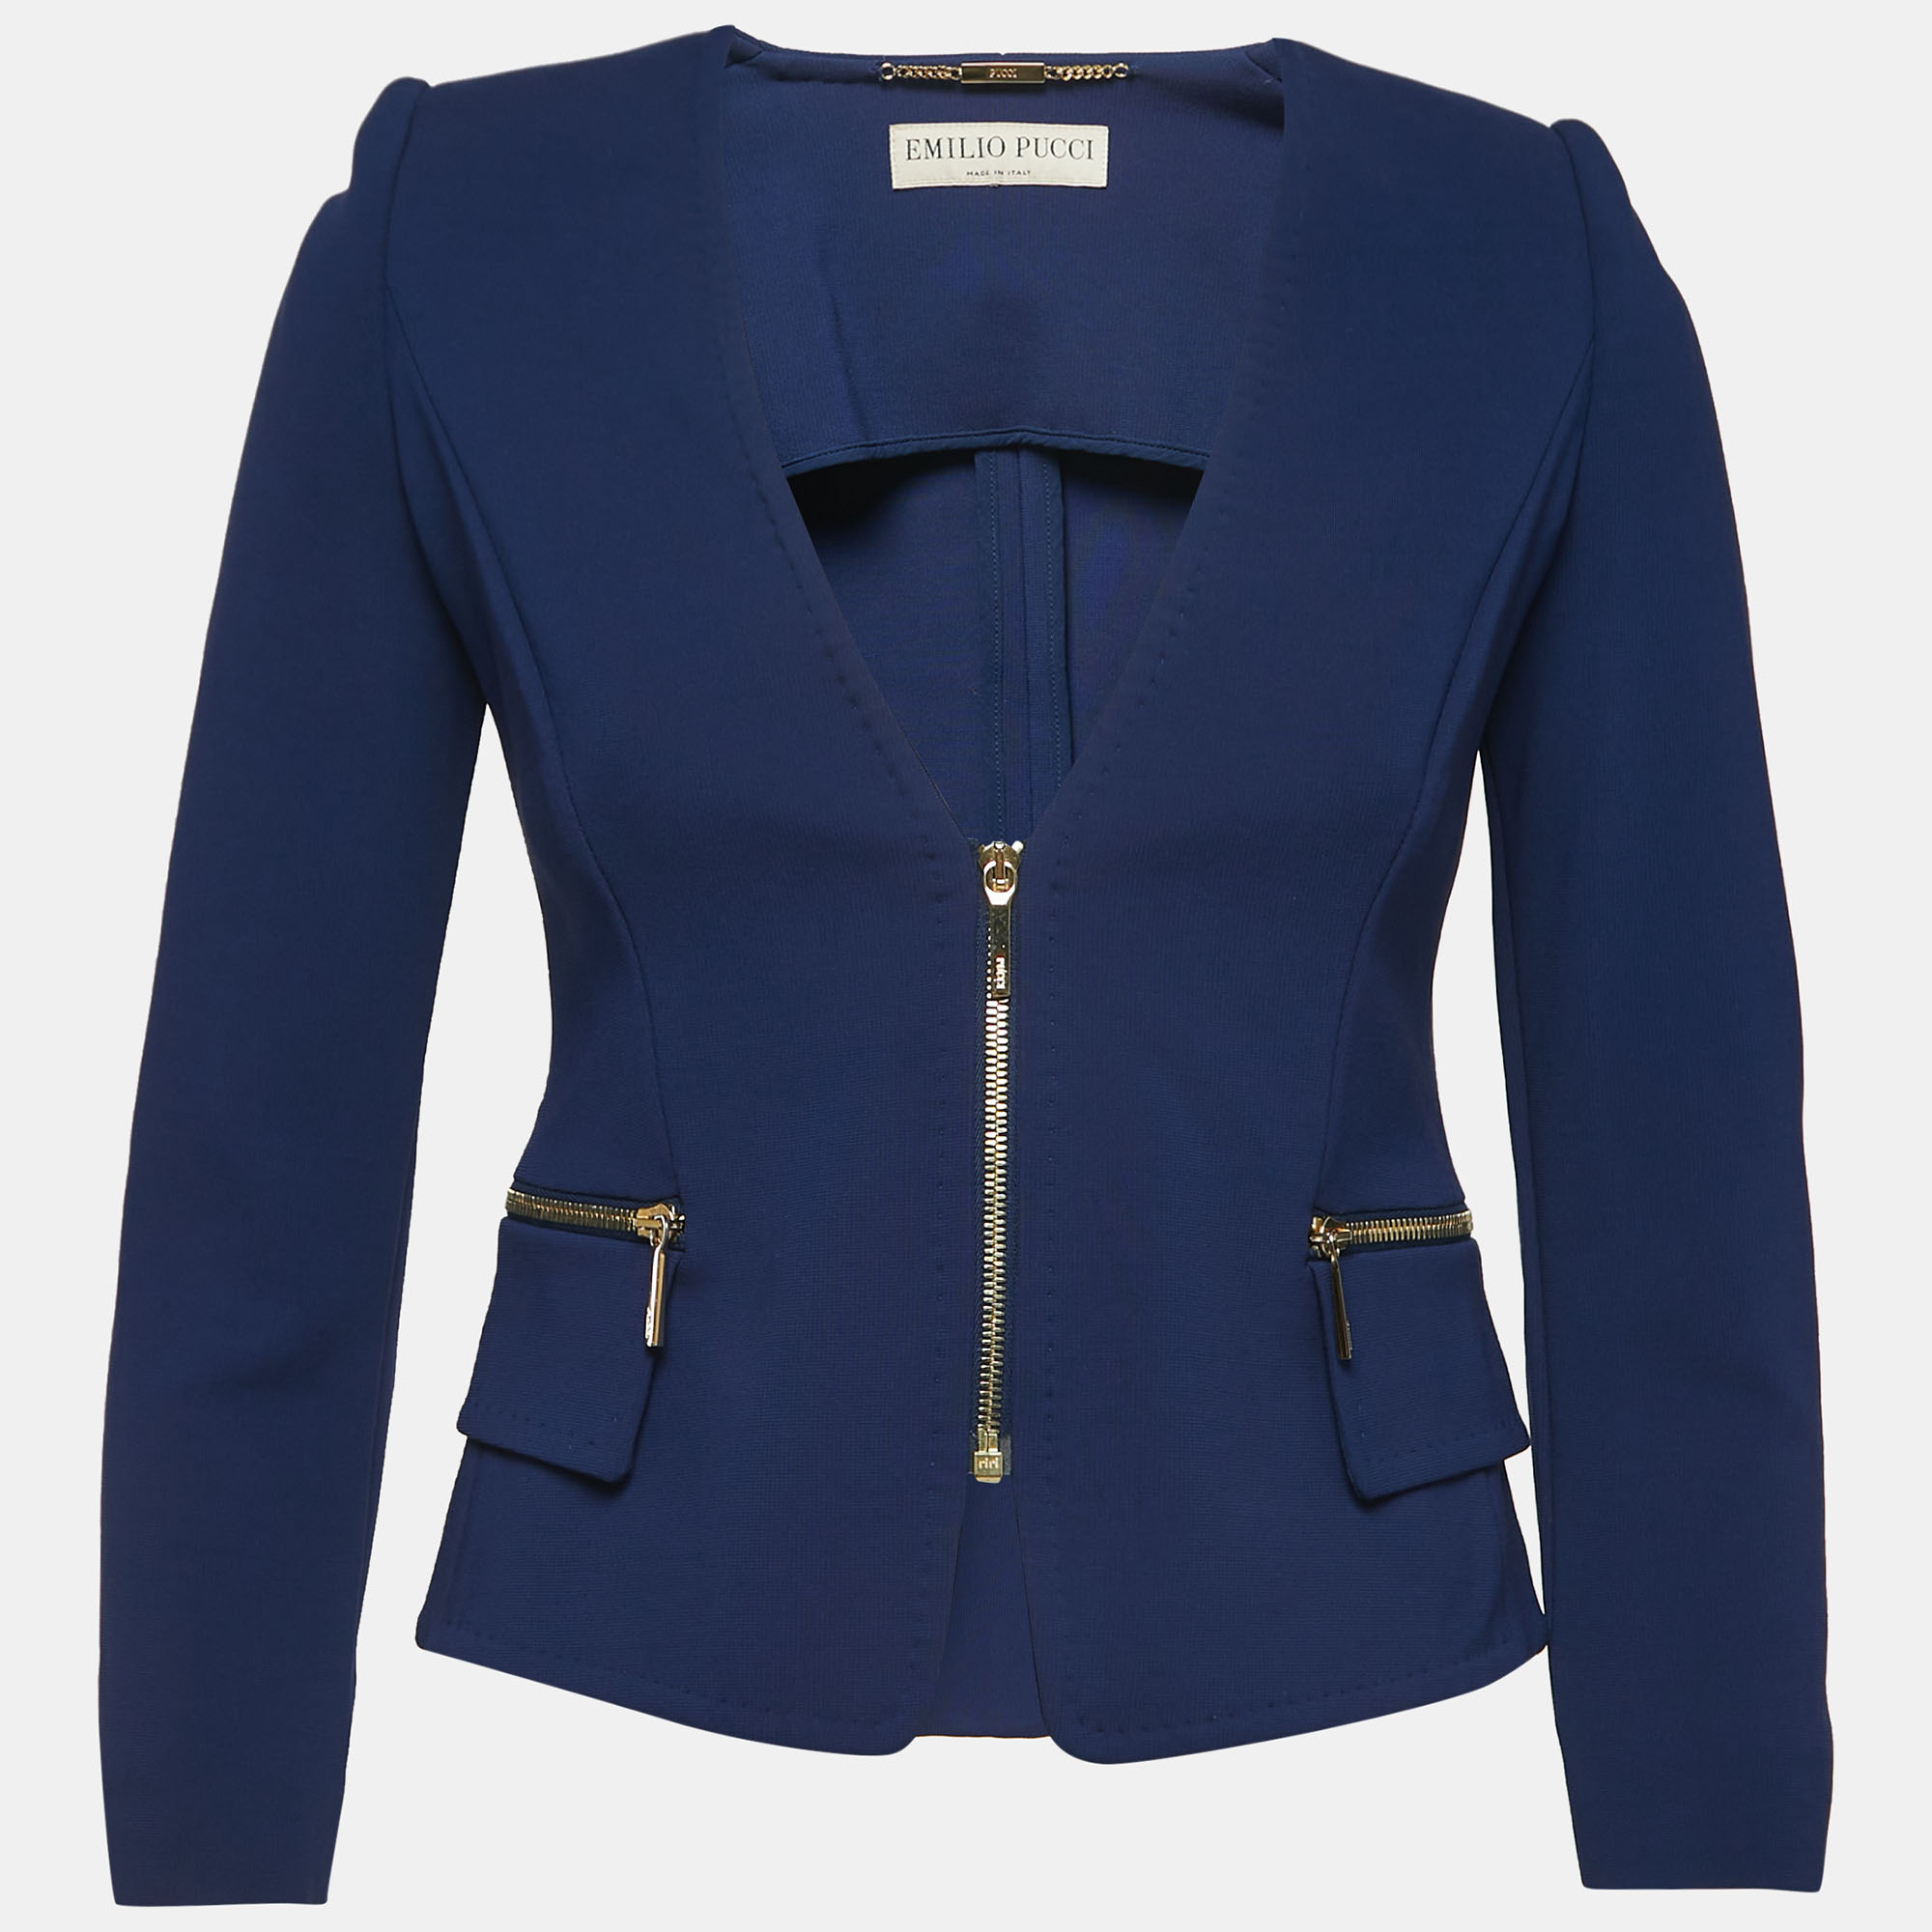 Emilio Pucci Blue Stretch Knit Tailored Zip-Up Jacket S